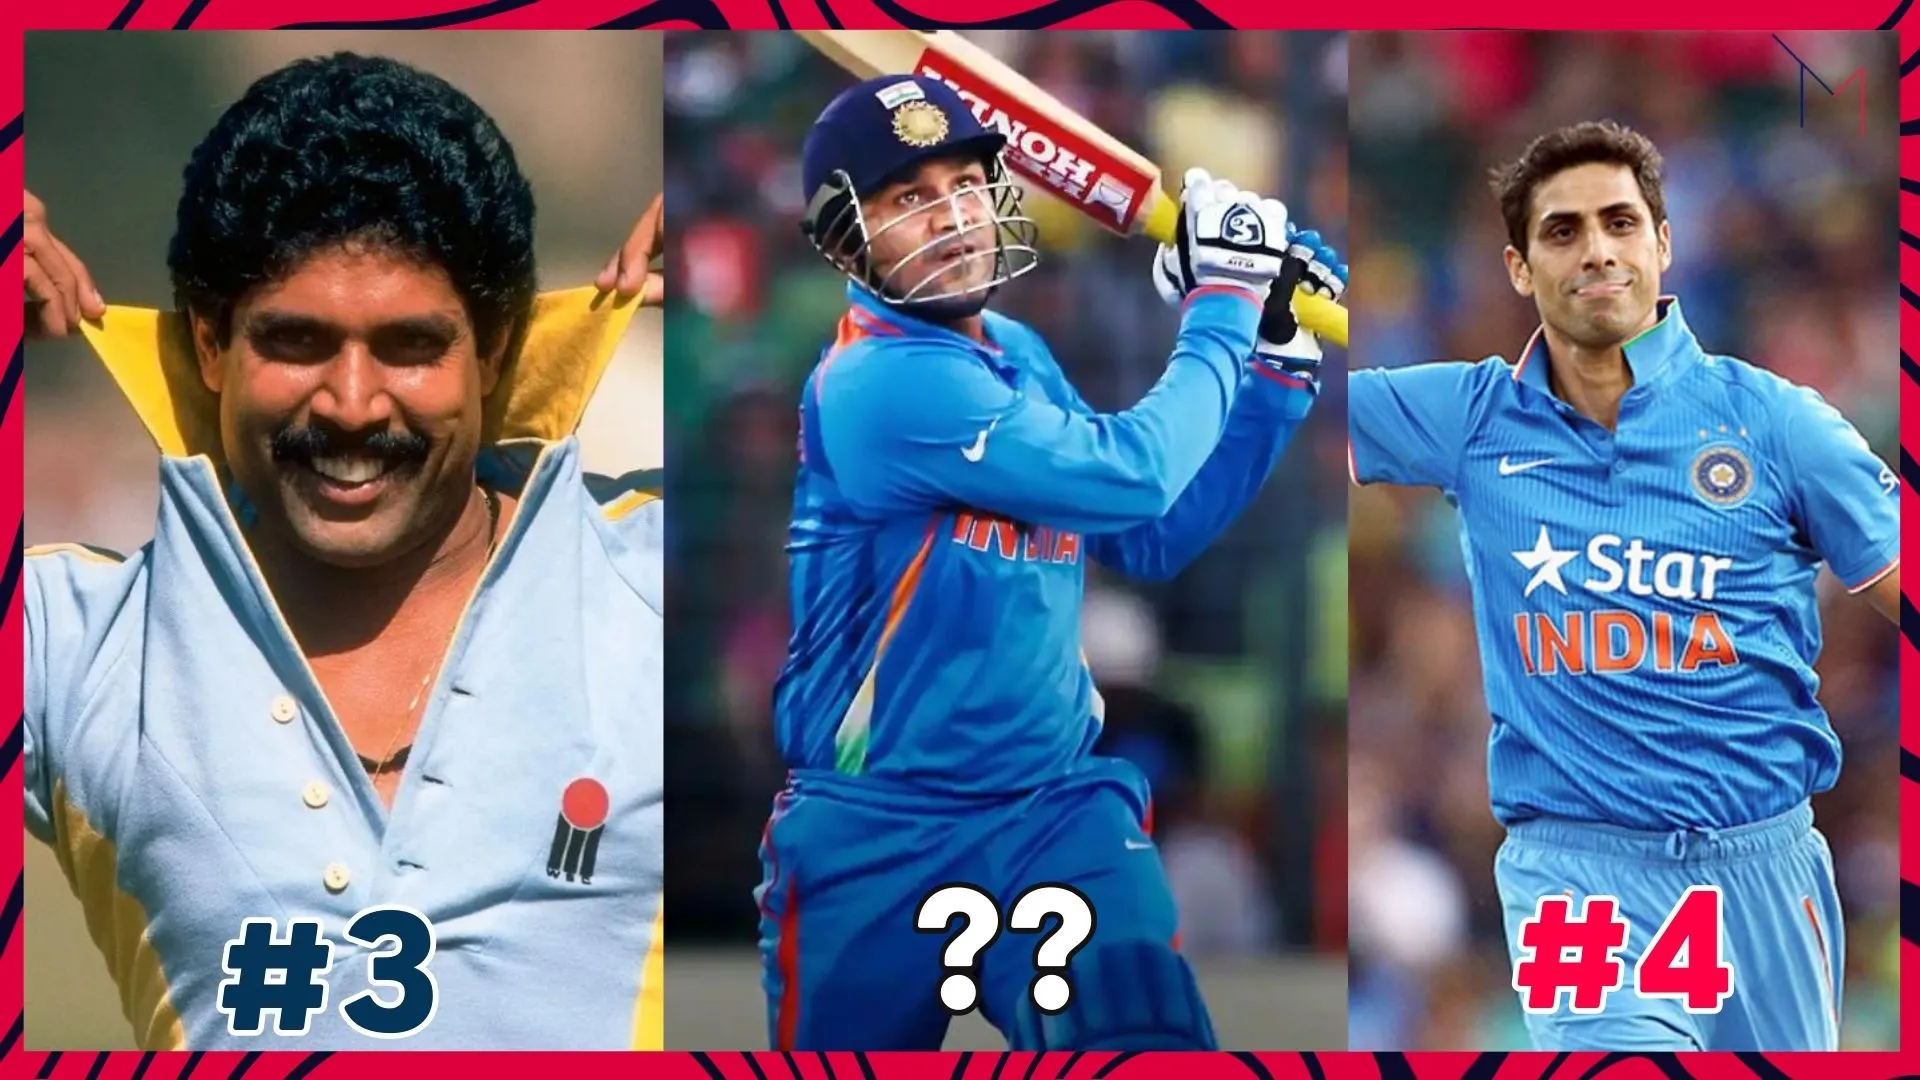 Top 10 most popular cricketers from Haryana - Famous cricket players from Haryana